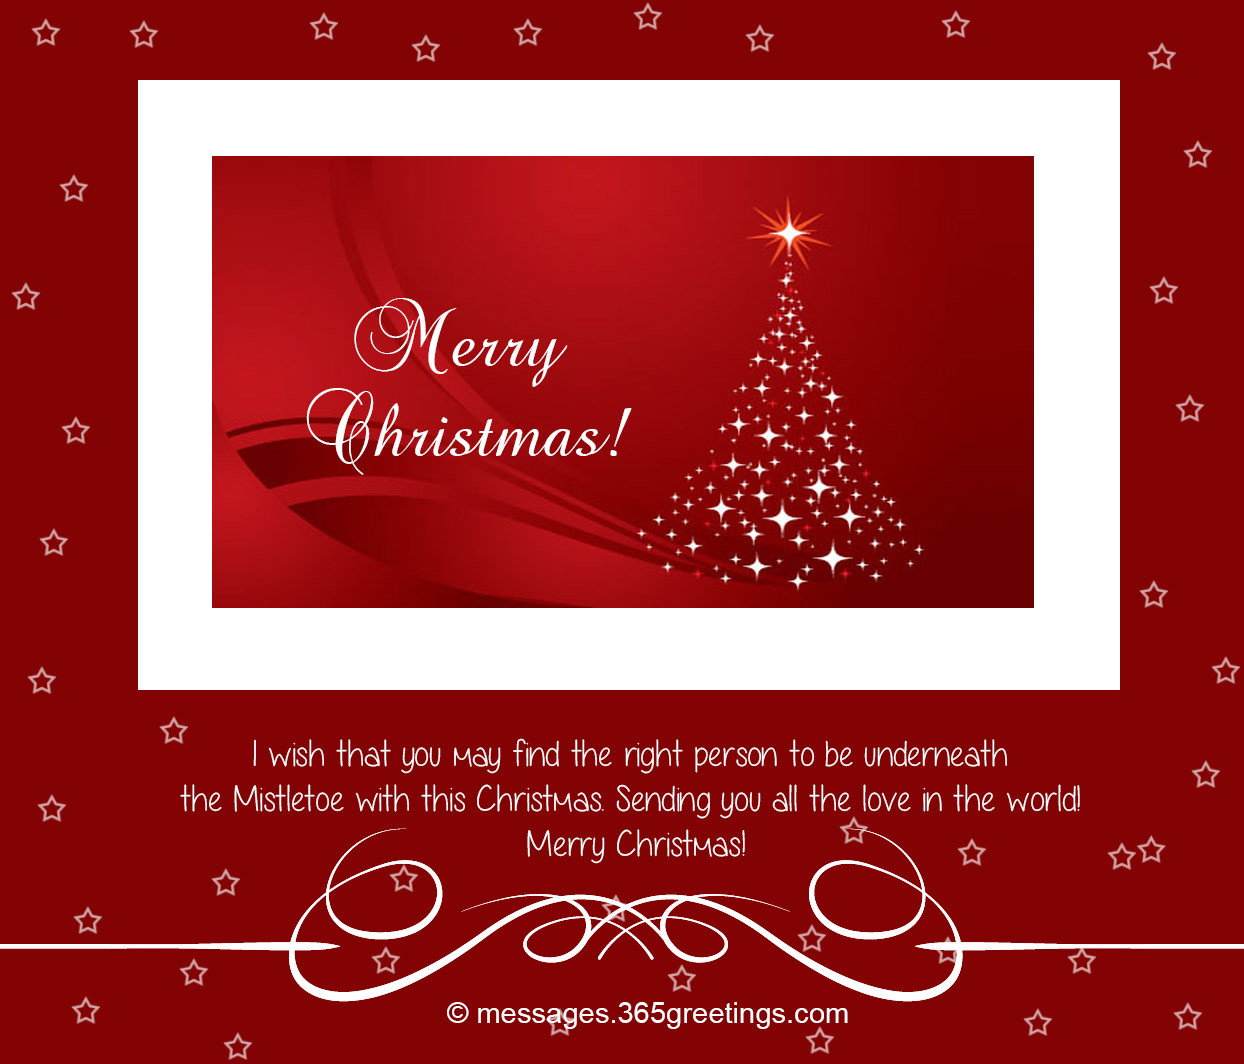 Christmas Card Greetings Quotes
 Best Christmas Card Sayings and Greetings 365greetings